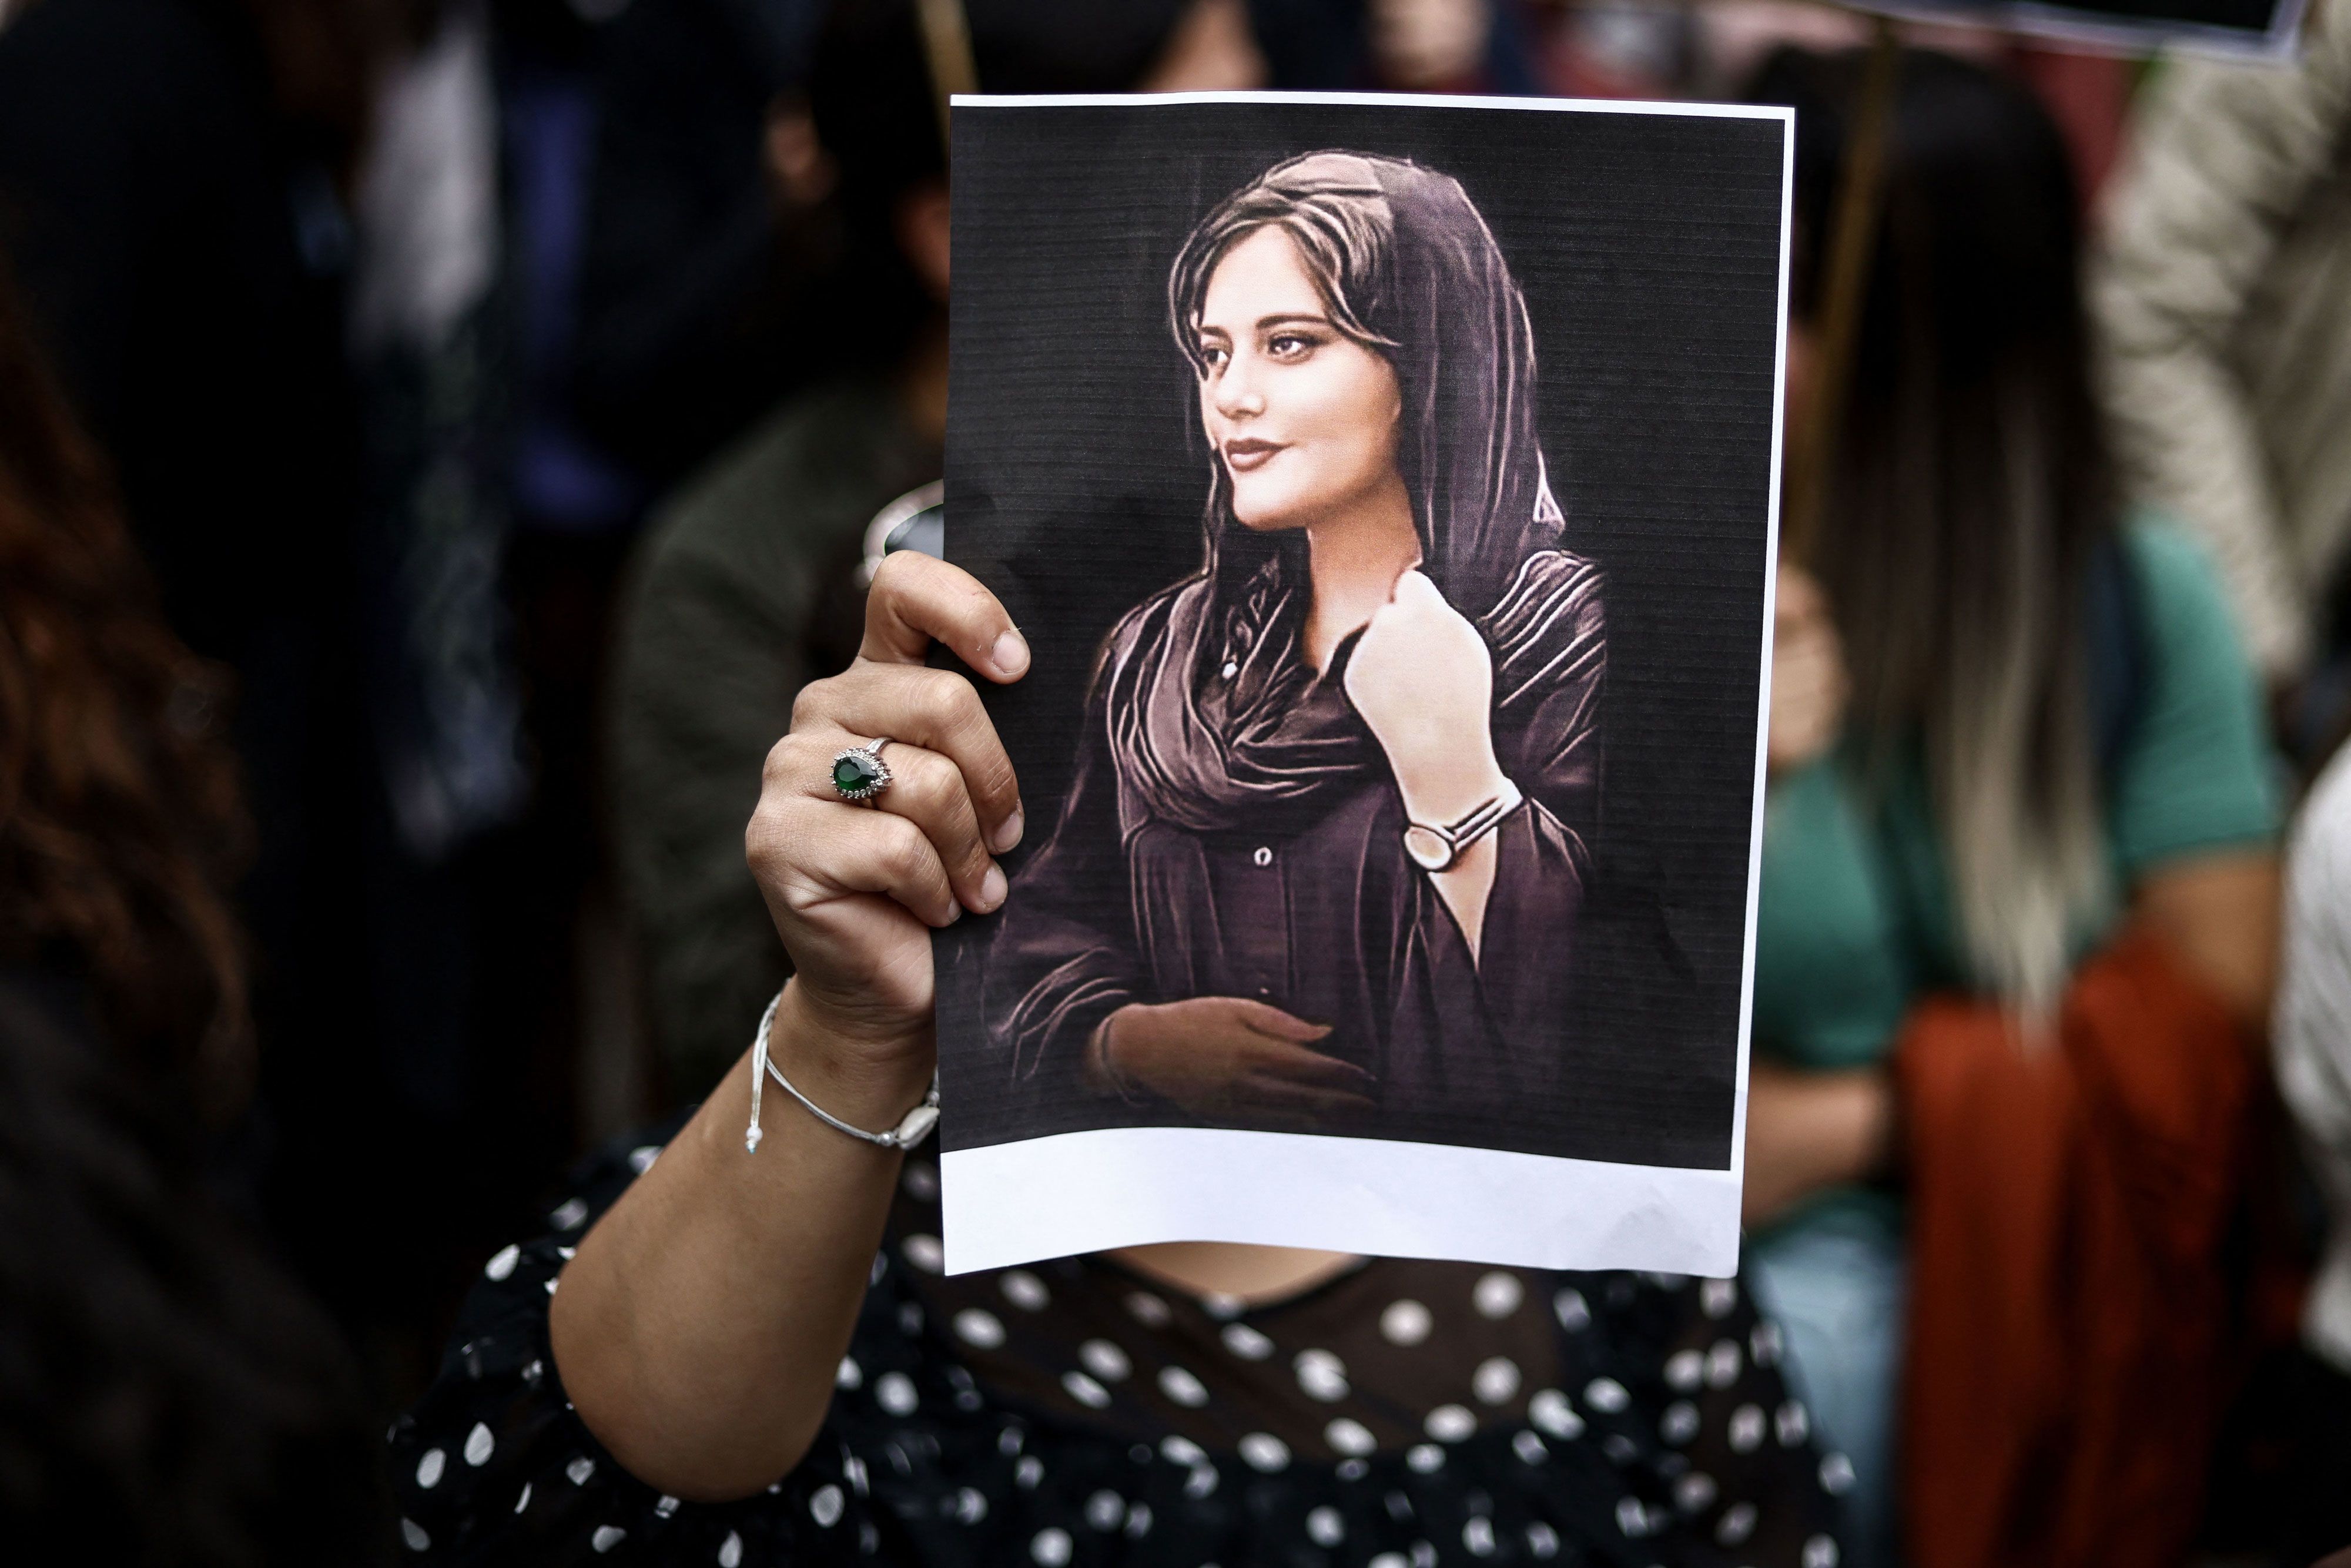 Iranian journalists who broke news of Mahsa Amini’s death labelled as CIA agents